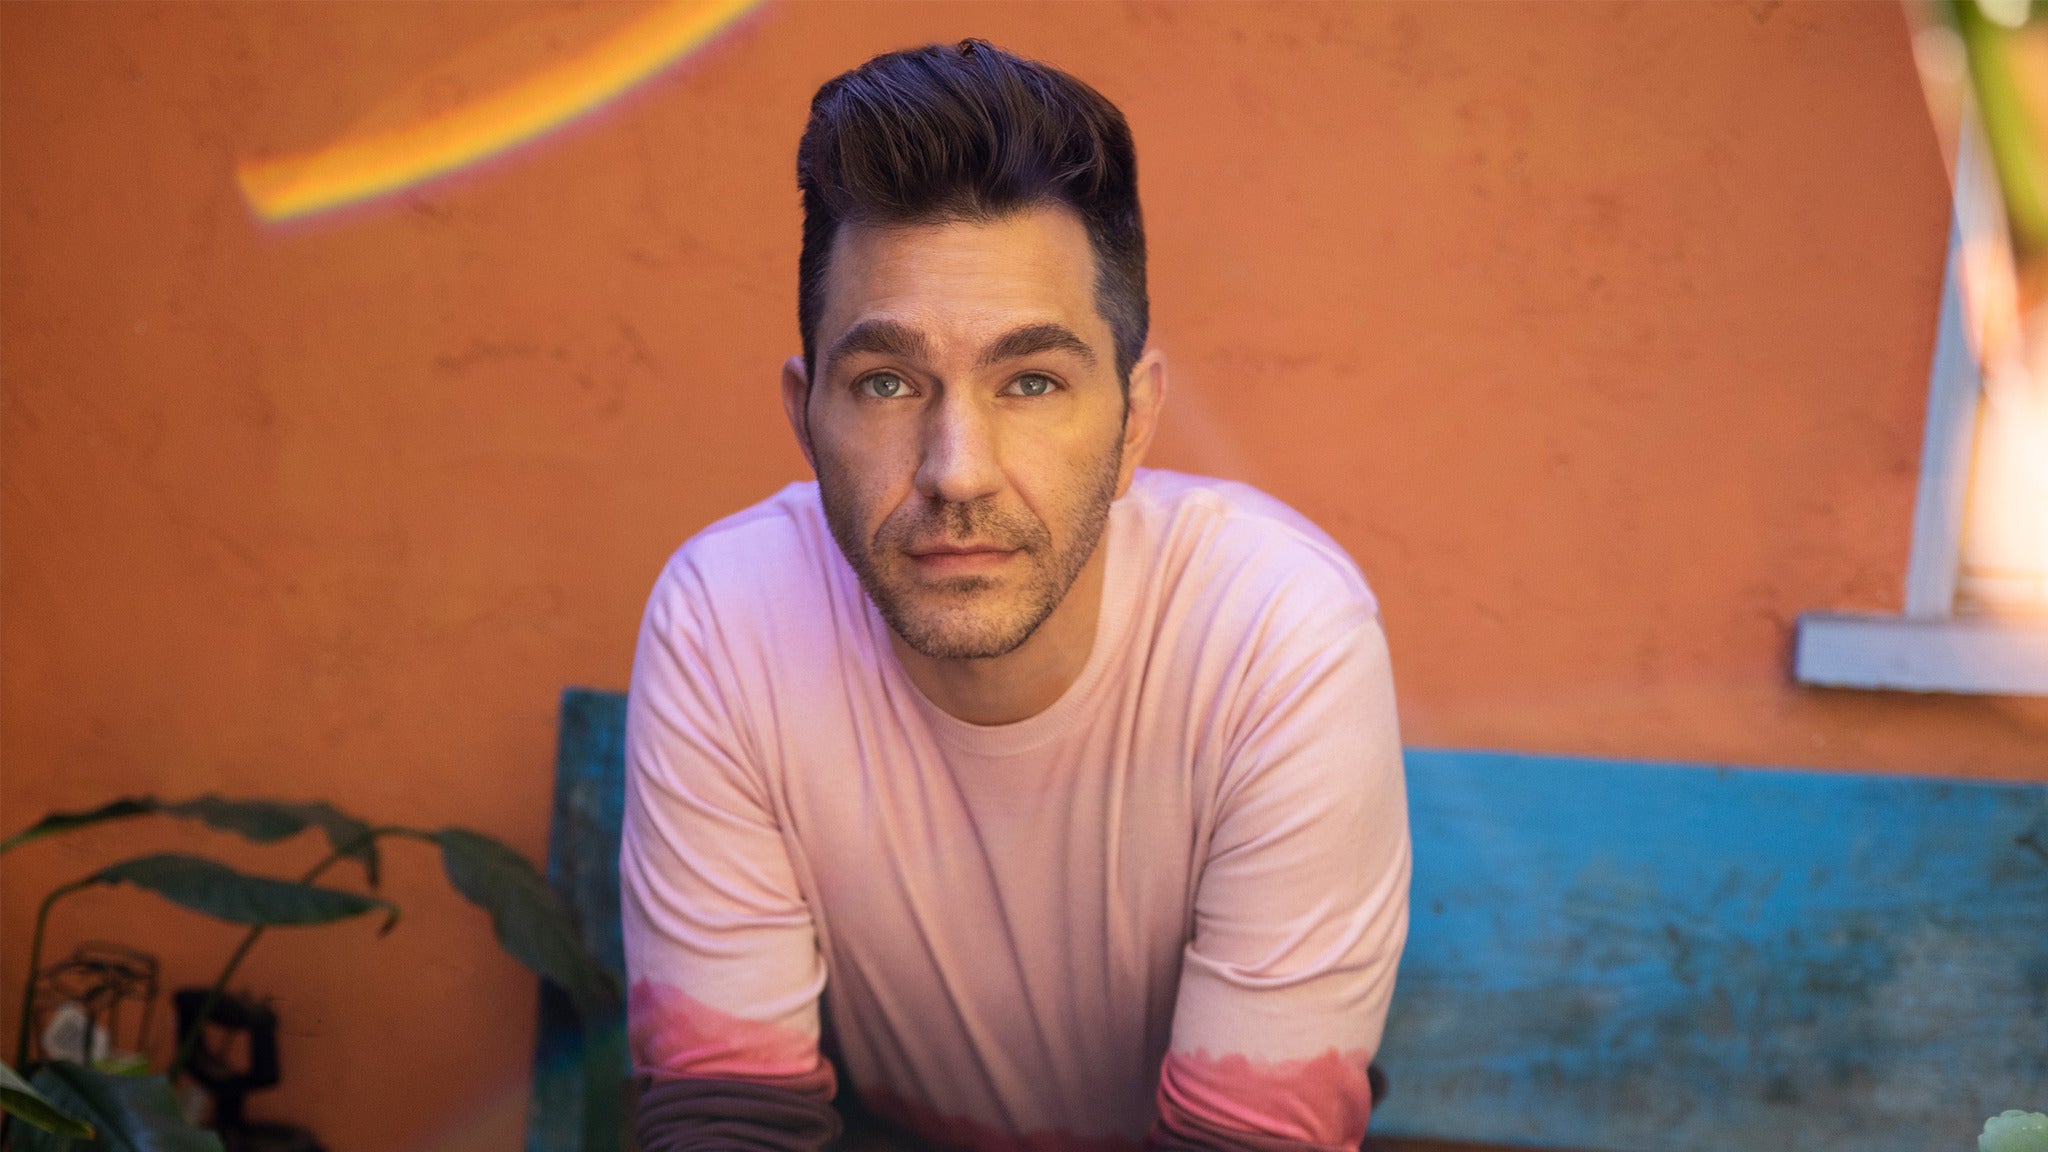 Andy Grammer - the Art of Joy Tour